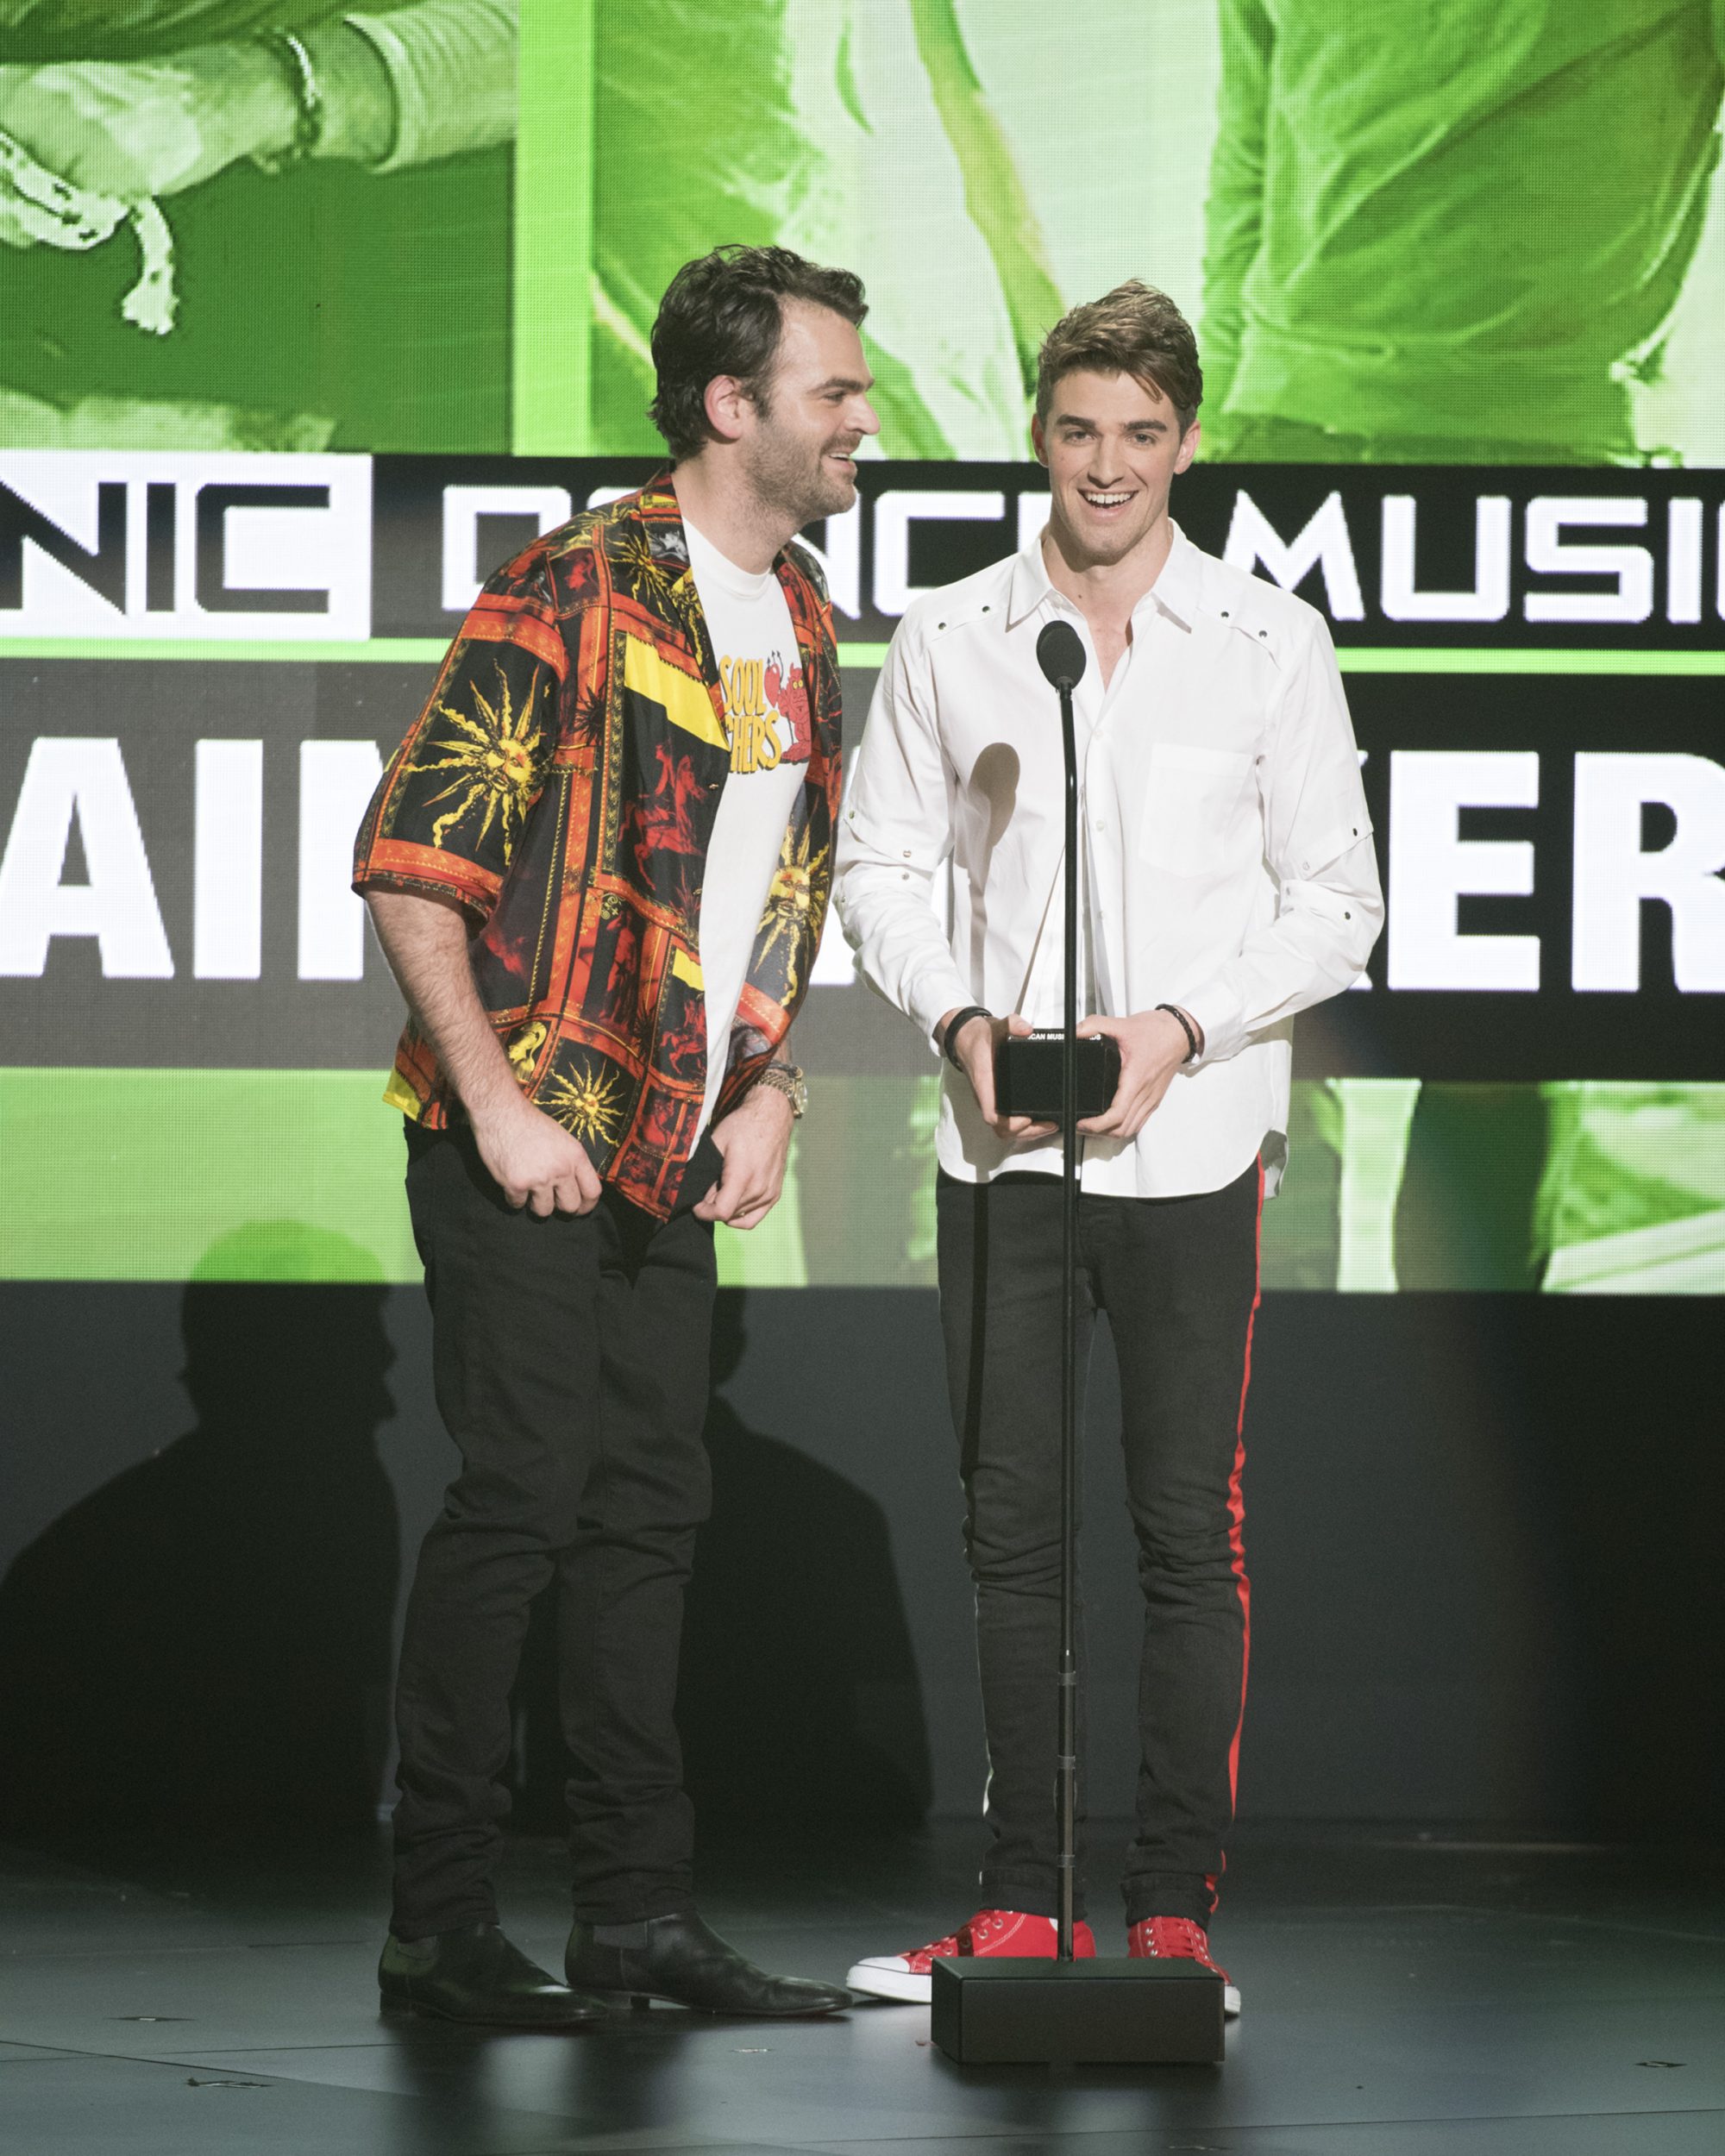 THE 2016 AMERICAN MUSIC AWARDS(r) - The “2016 American Music Awards,” the world’s biggest fan-voted award show, broadcasts live from the Microsoft Theater in Los Angeles on SUNDAY, NOVEMBER 20, at 8:00 p.m. EST, on ABC. (Image Group LA/ABC) THE CHAINSMOKERS